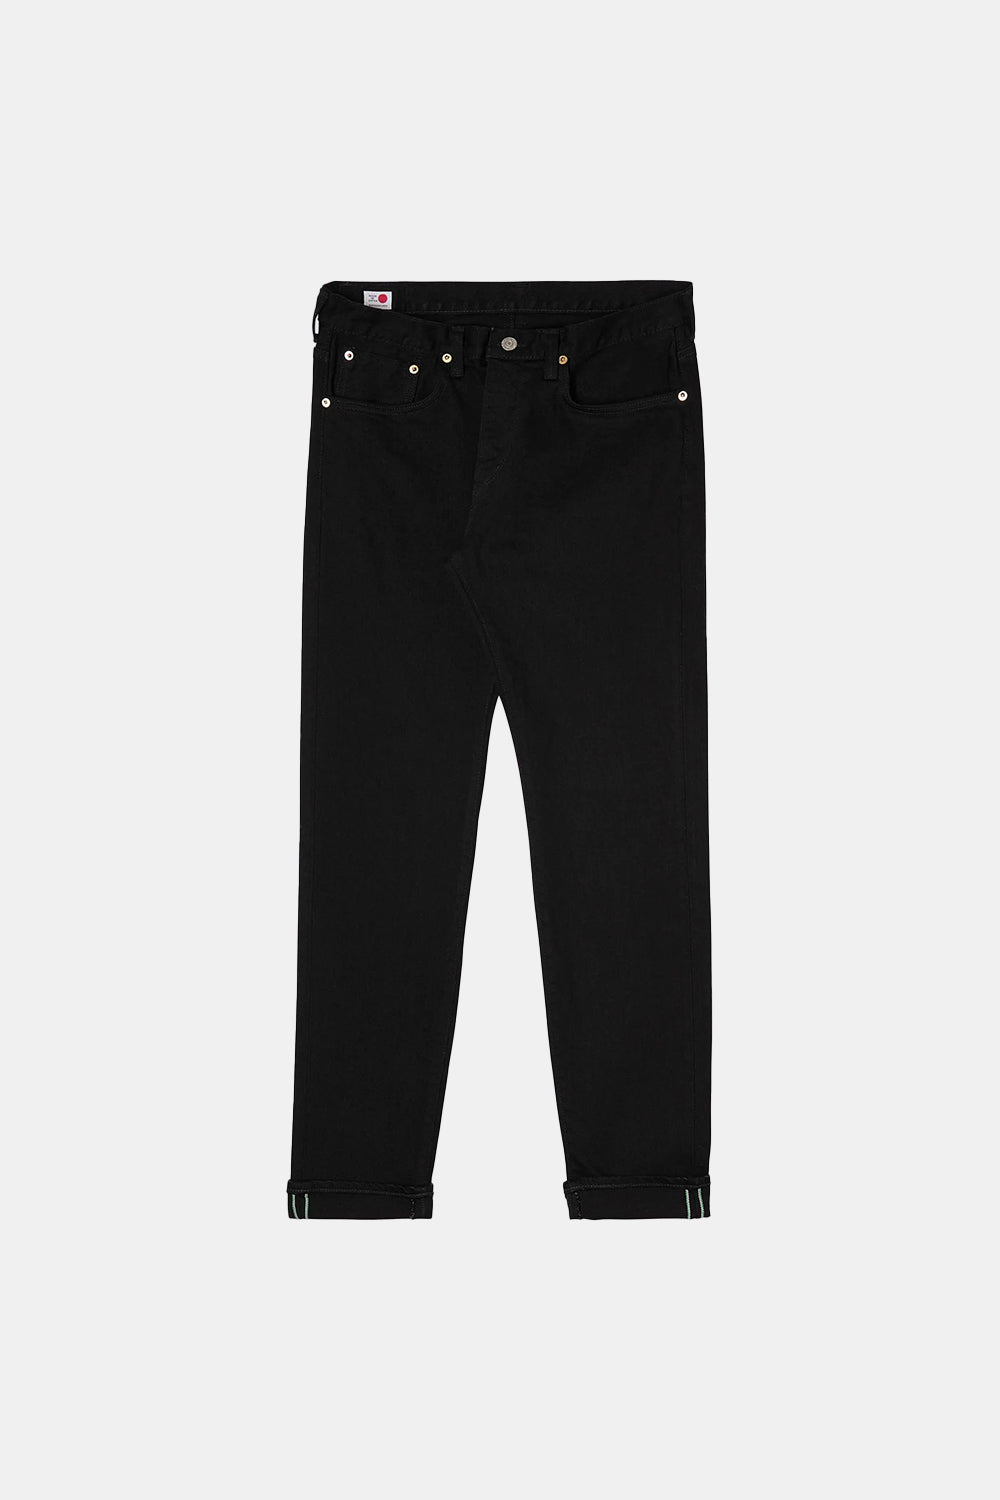 Edwin Regular Tapered Kaihara Black Rinsed Jeans (Green &amp; White Selvage) | Number Six